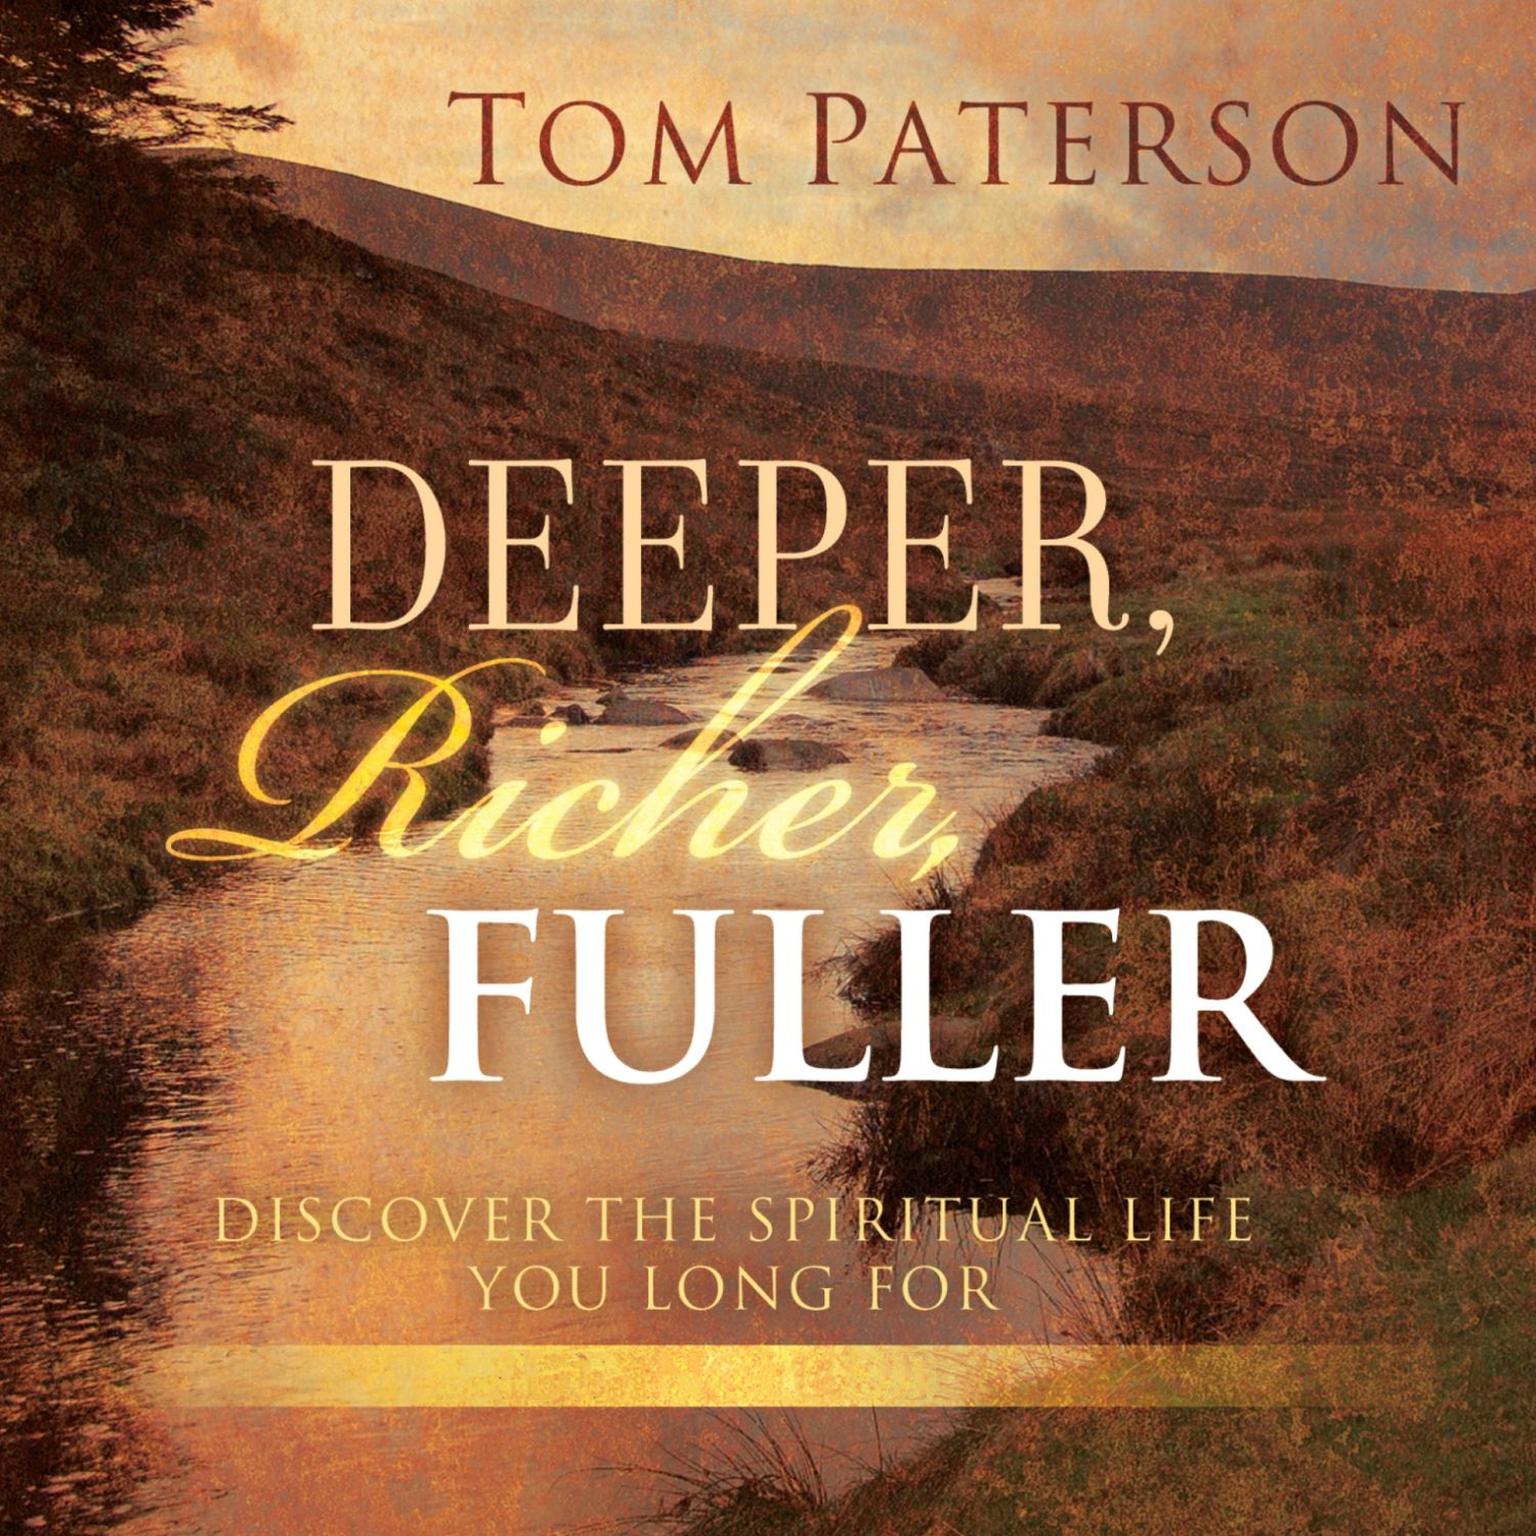 Deeper, Richer, Fuller: Discover the Spiritual Life You Long For Audiobook, by Tom Paterson